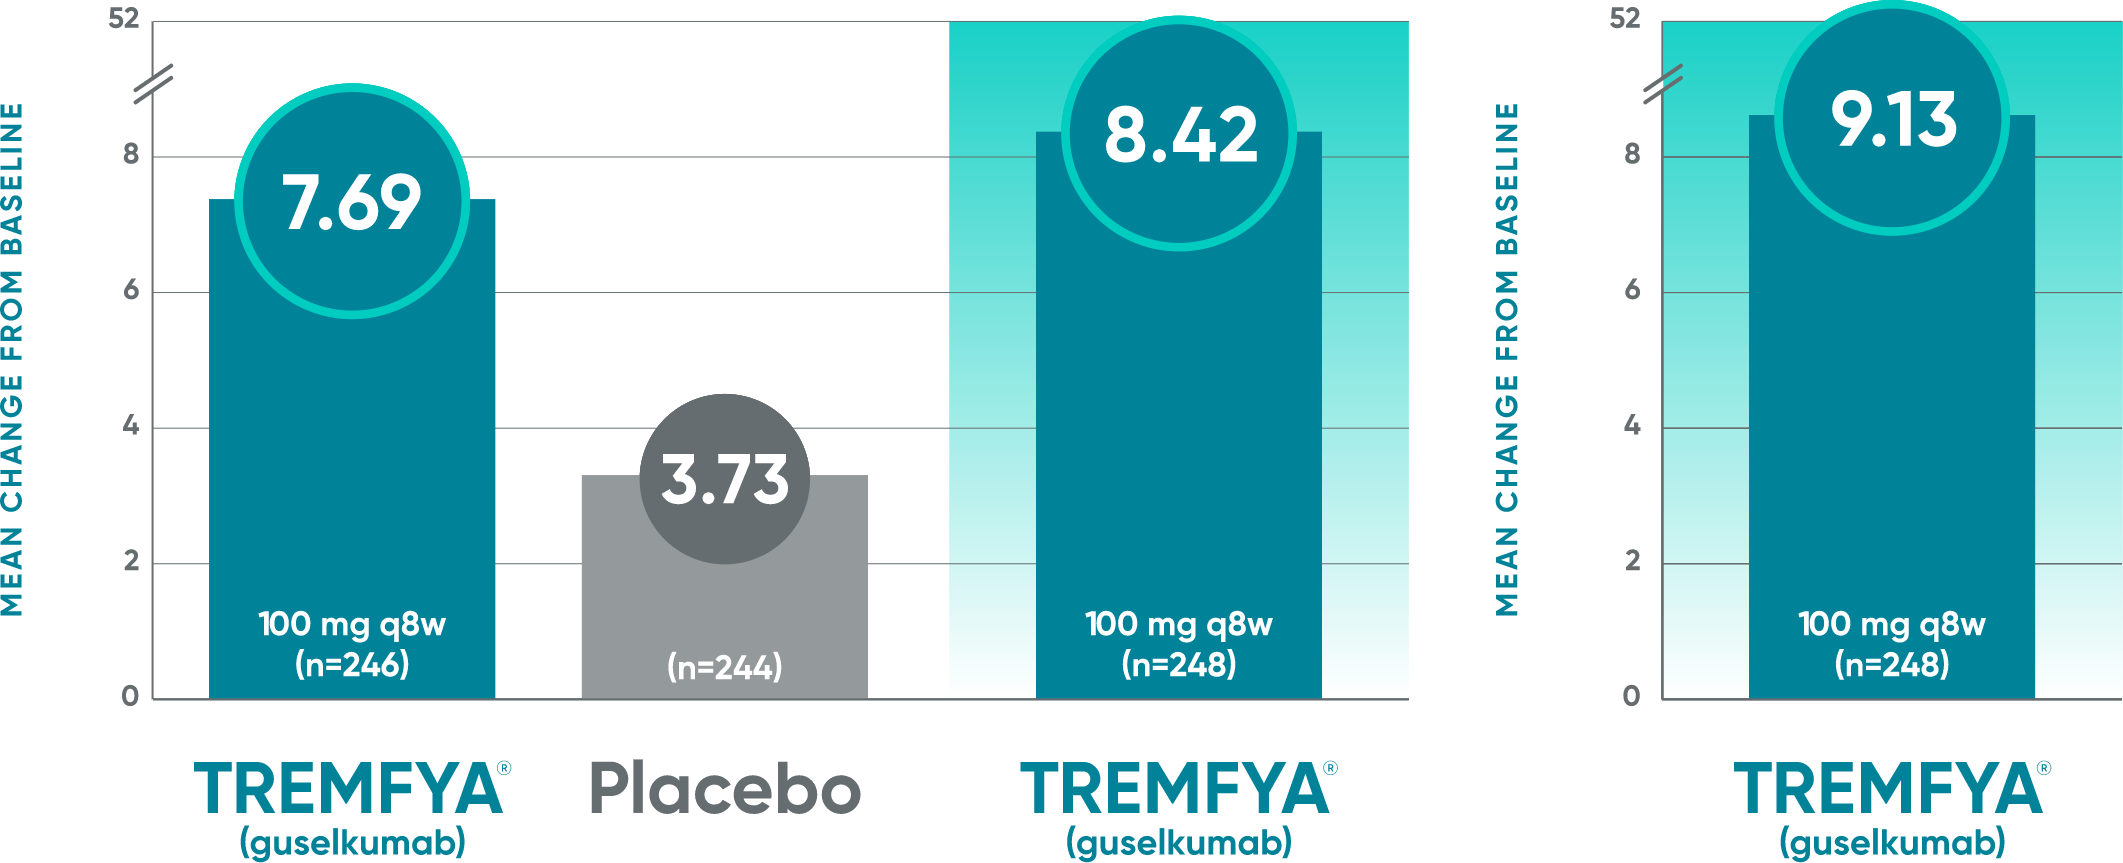 TREMFYA® DISCOVER 2  improvements in fatigue chart measured by FACIT-F